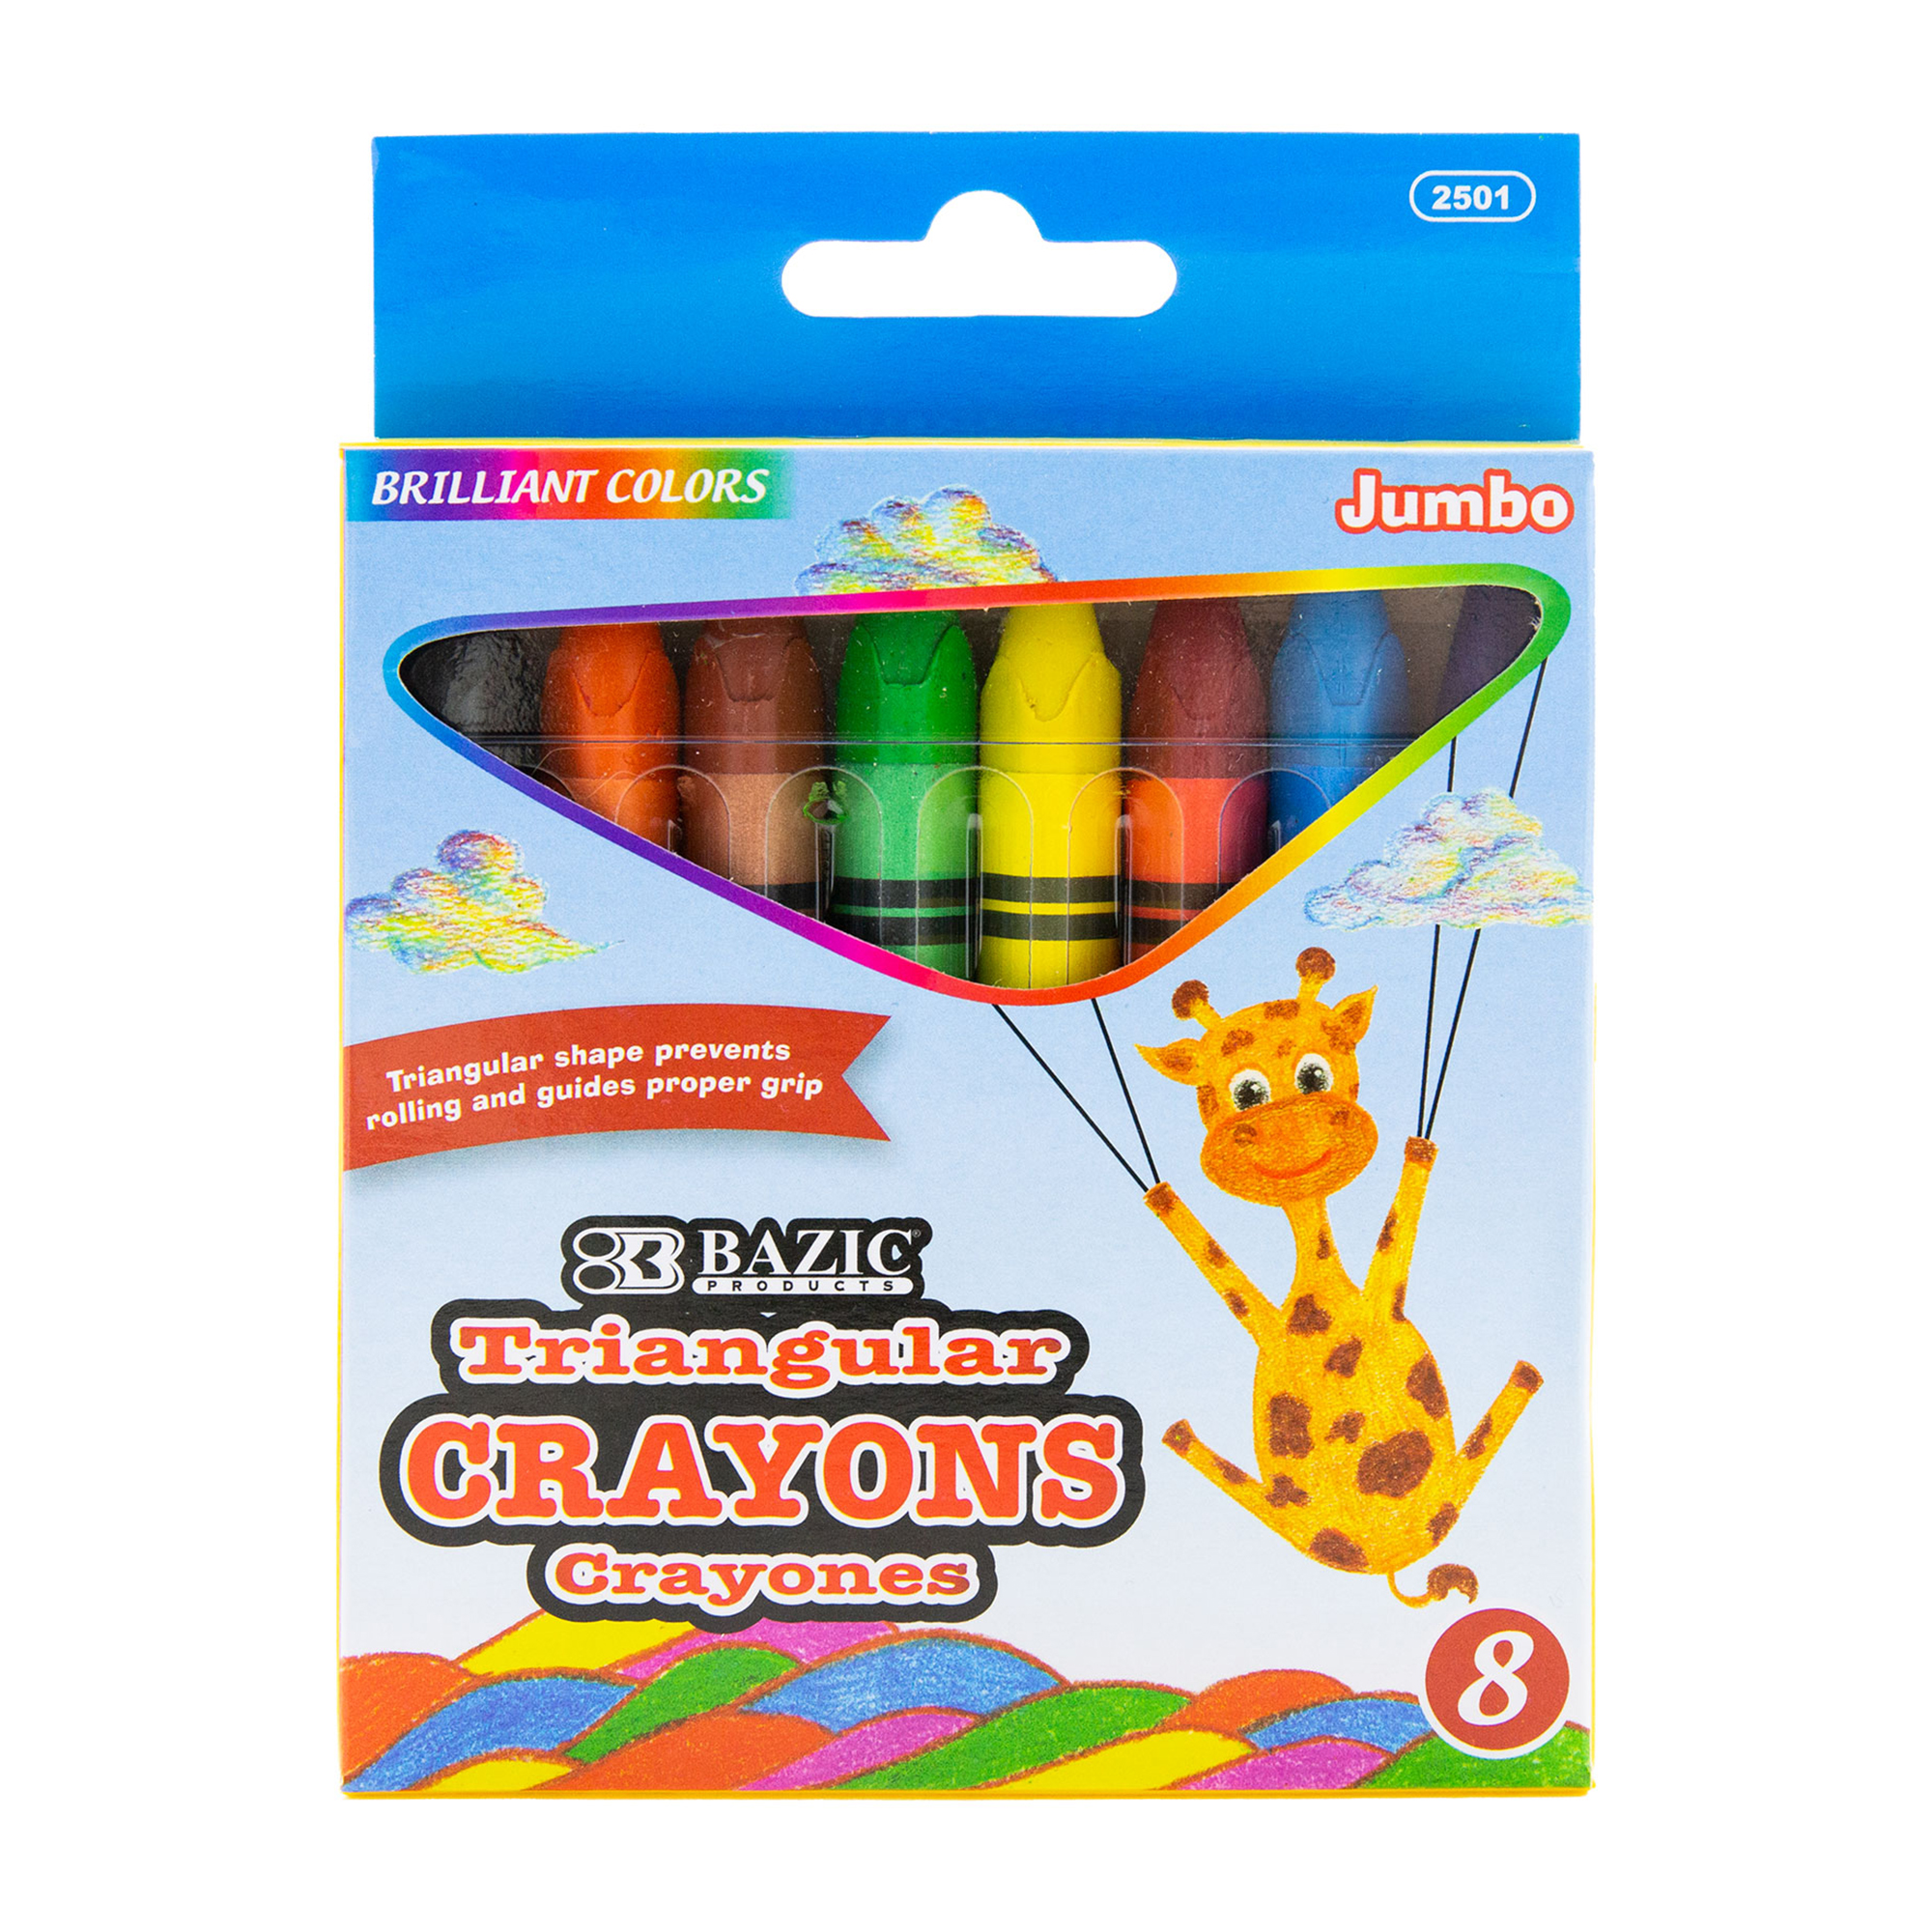 MASSRT Triangle Jumbo Crayons for Kids Ages 2-4, 18 Colors